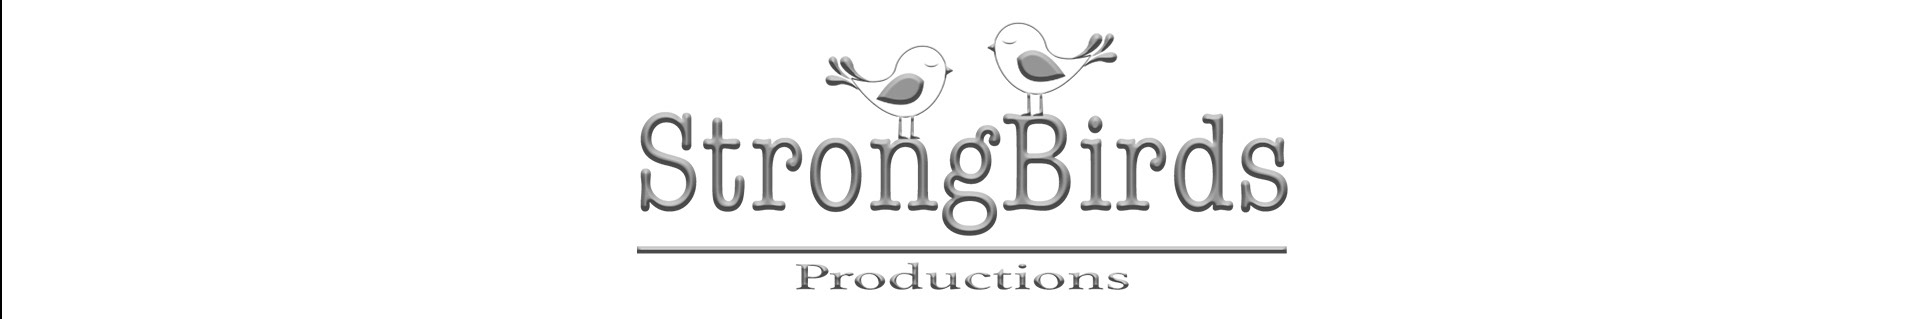 Strong Birds Productions's profile banner